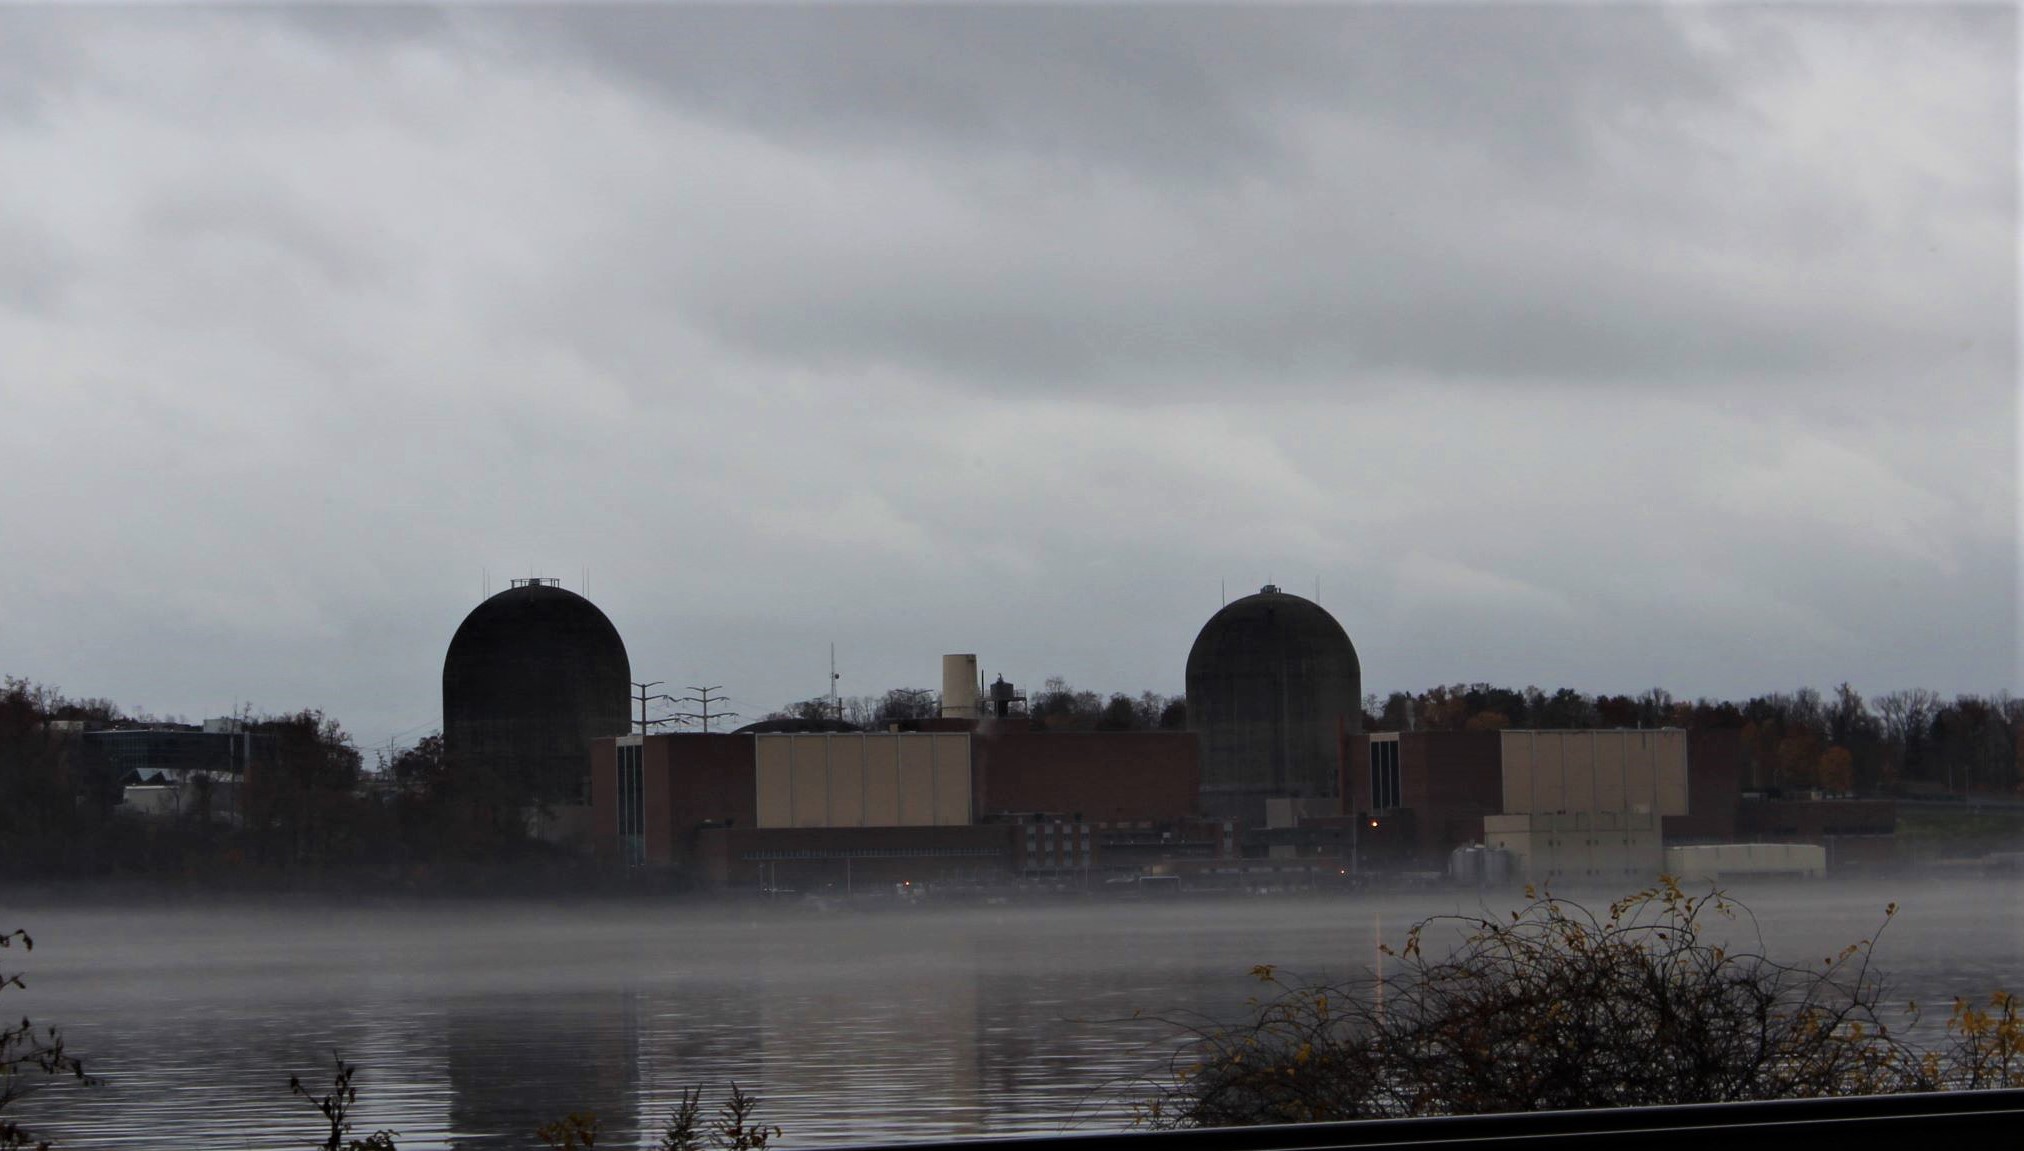 Indian Point set to completely close by mid-2021. (Photo Kathy Kahn)